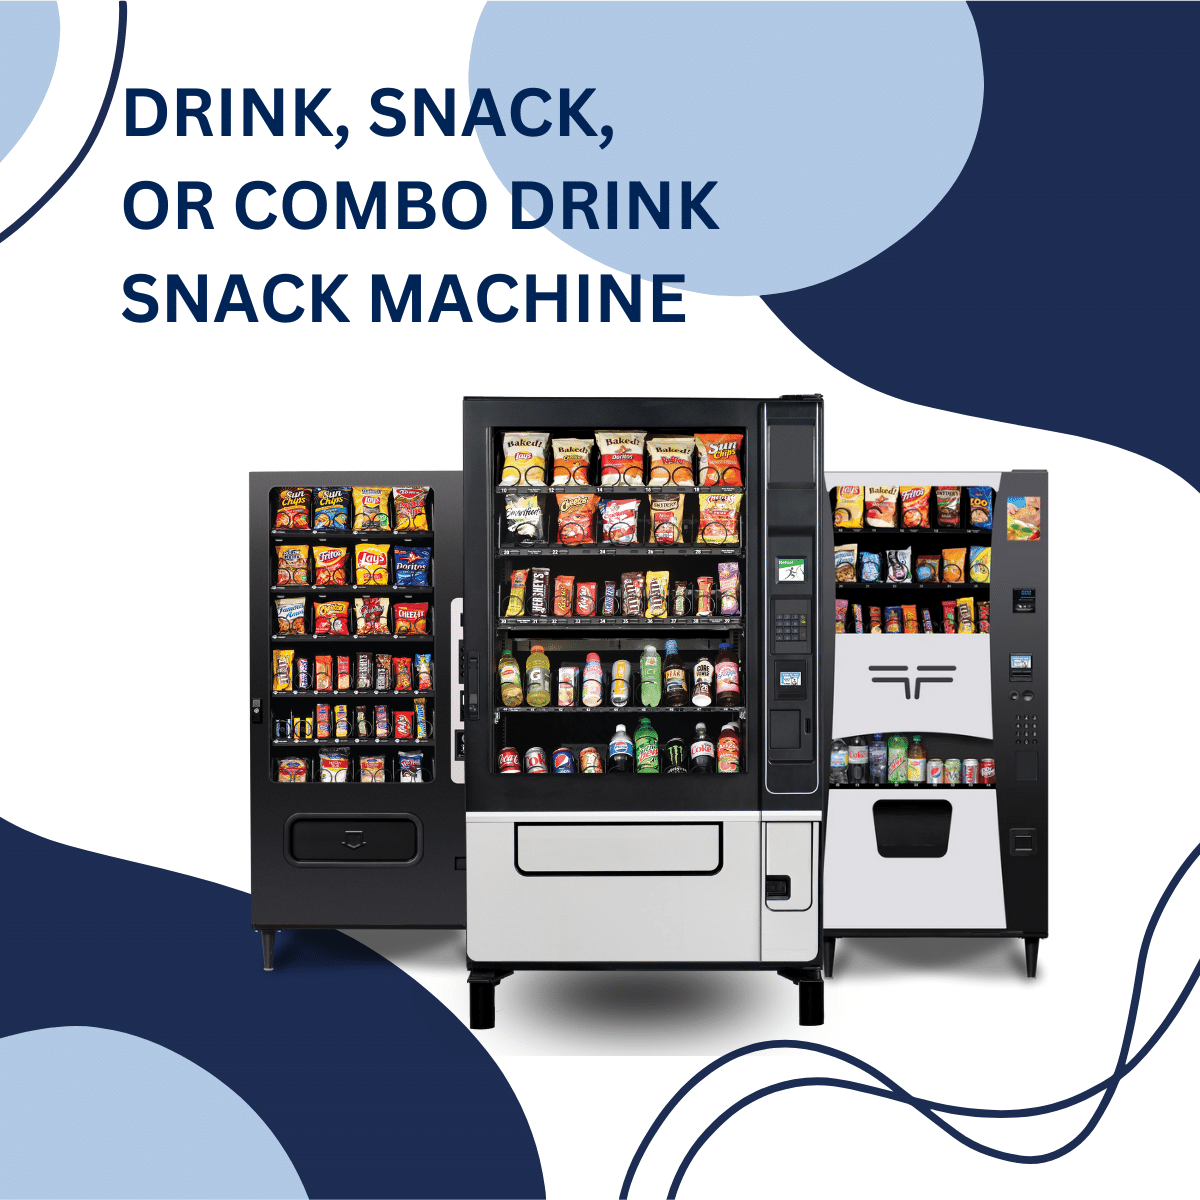 DRINK, SNACK, OR COMBO DRINK SNACK MACHINE